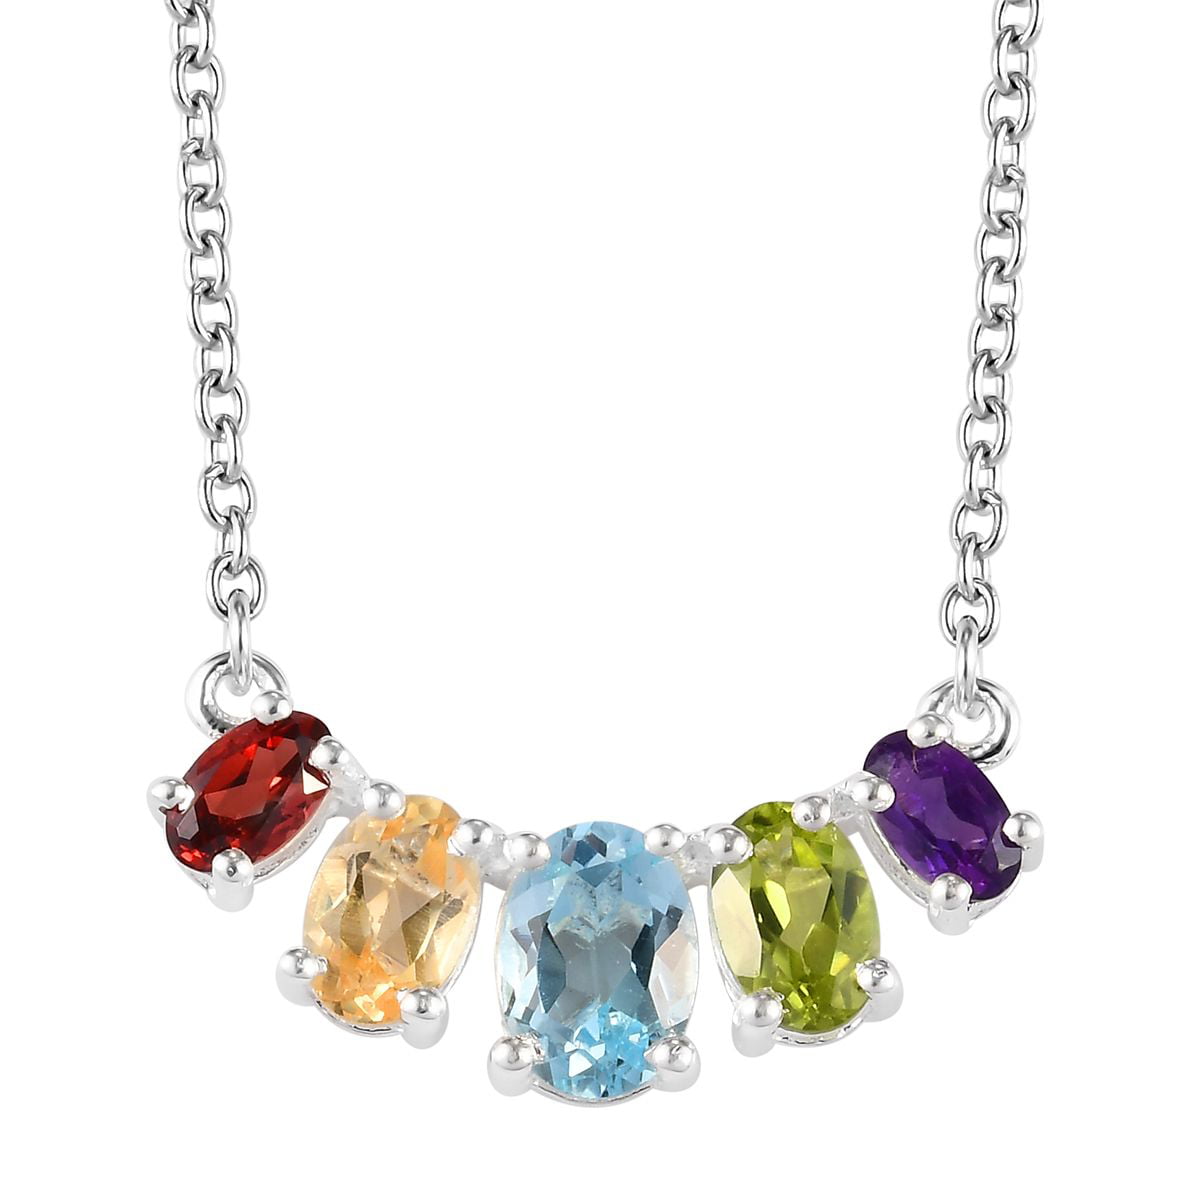 Crystal Topaz Necklace 925 Sterling Silver Chain Pendant Womens Jewellery Gift 